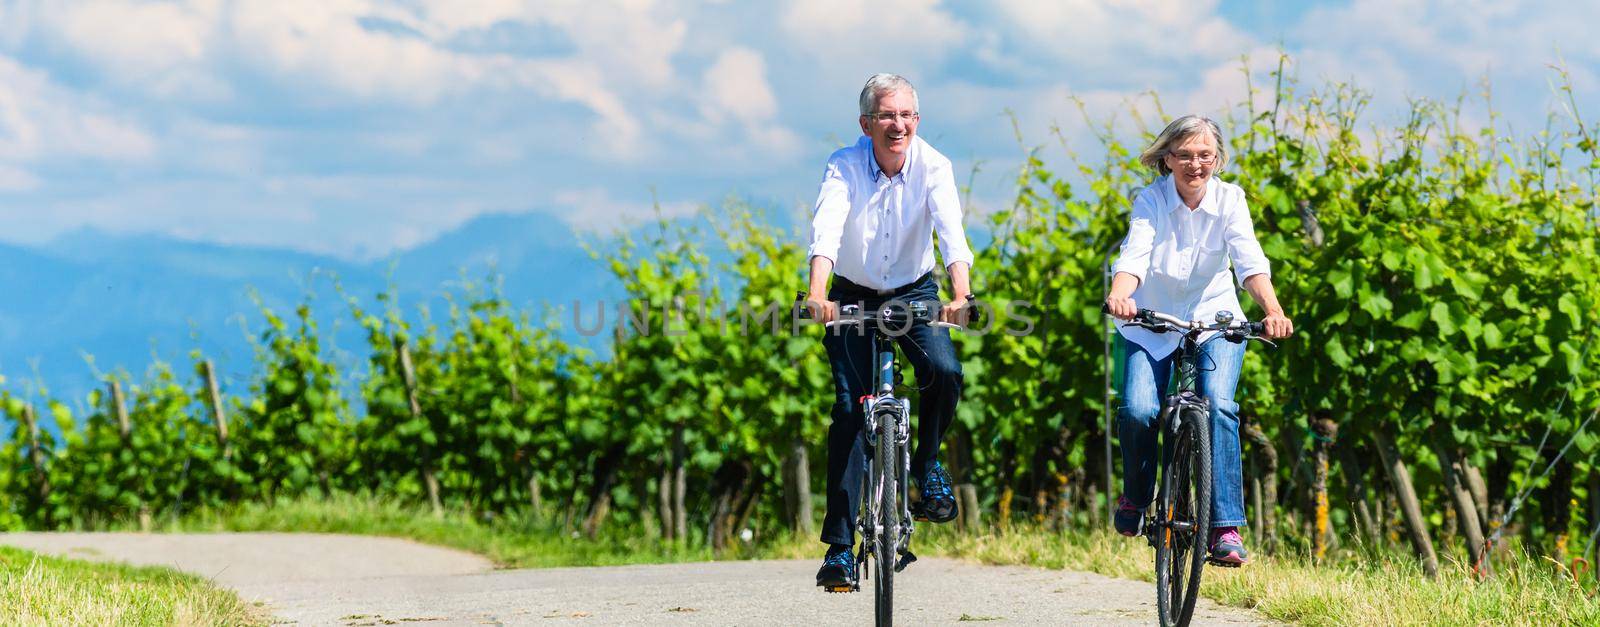 Seniors riding bicycle in vineyard together by Kzenon